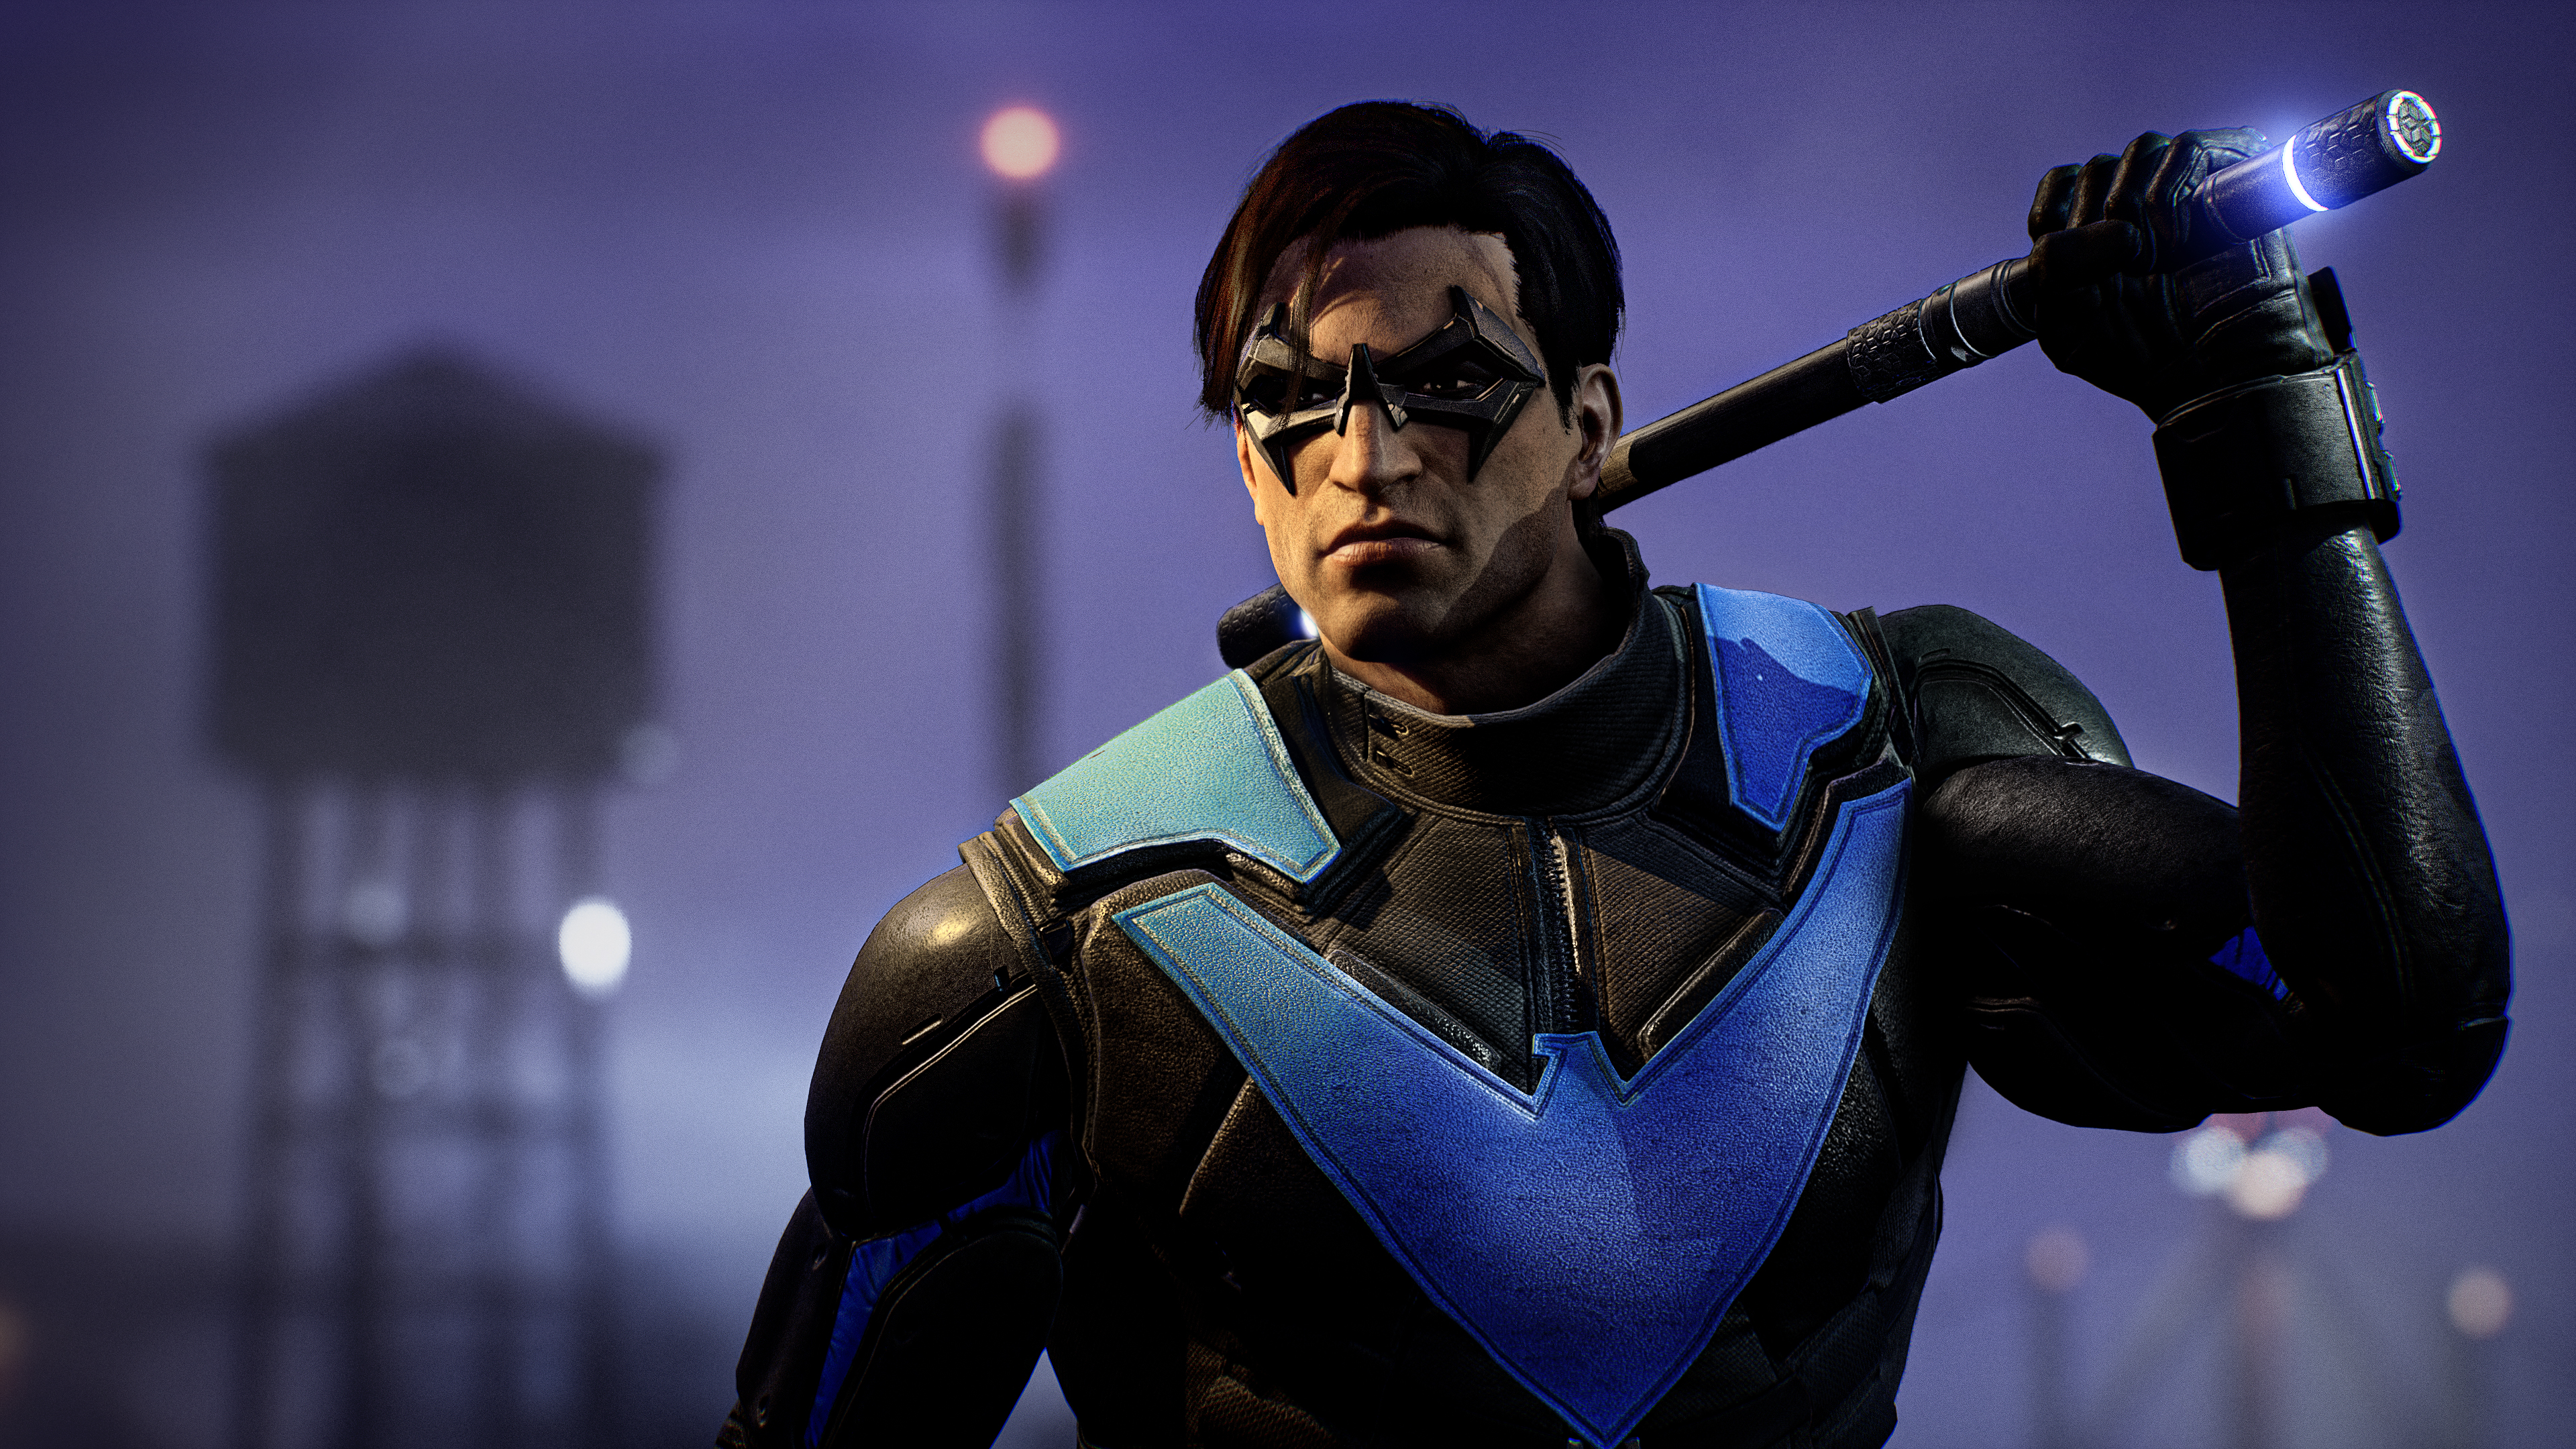 Gotham Knights Gets A 13-Minute Red Hood And Nightwing Gameplay Walkthrough;  PS4 And Xbox One Version Cancelled